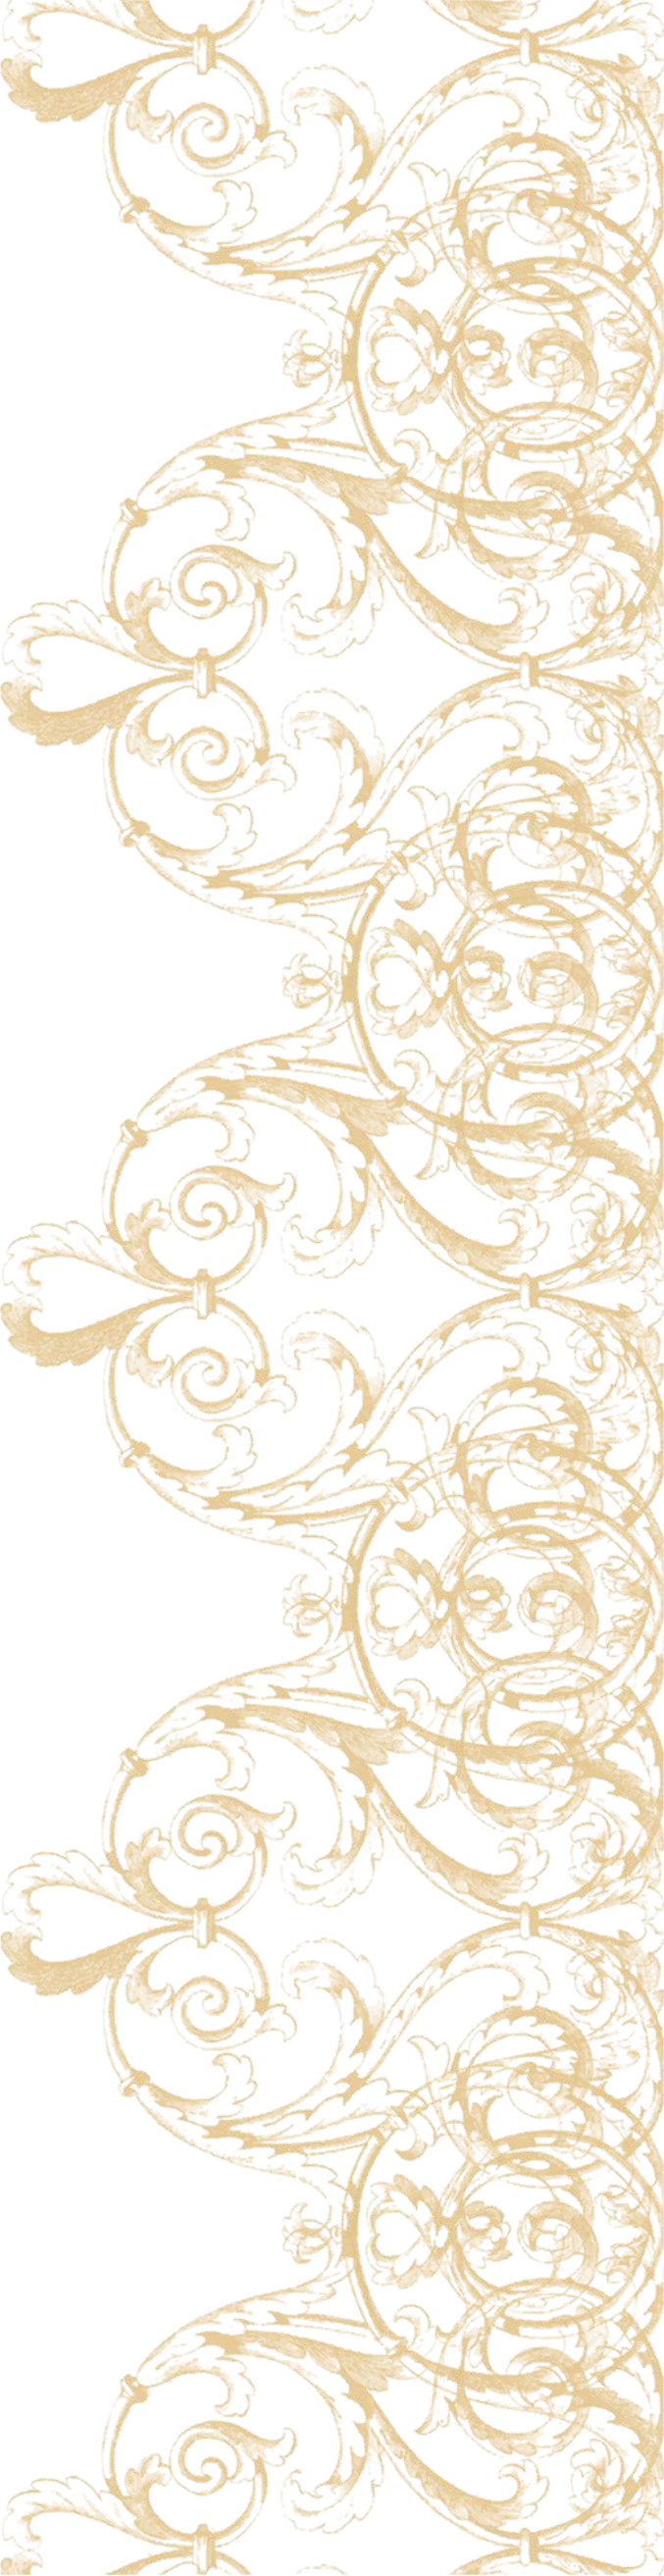 lace clipart free - photo #15